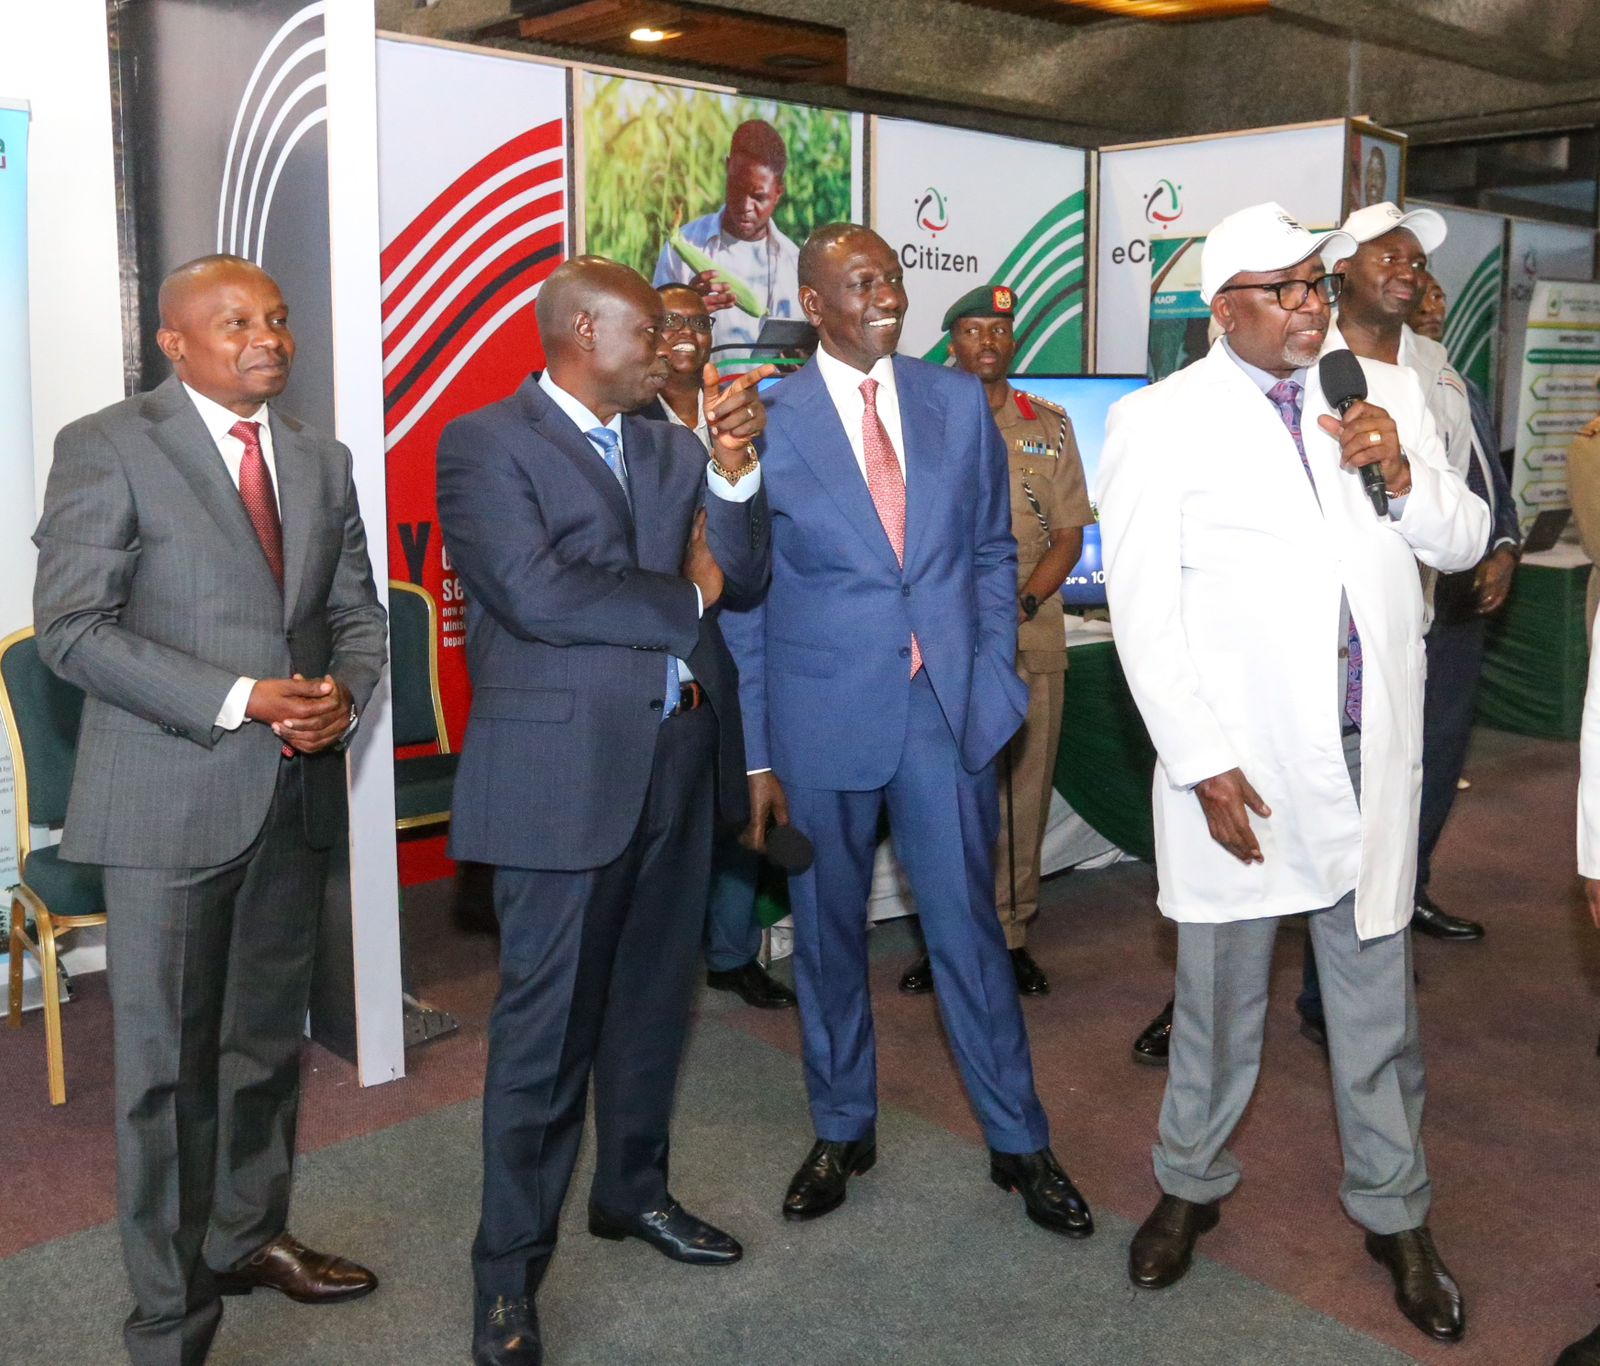 President William Ruto and senior government officials during the launch of Gava Mkononi app.